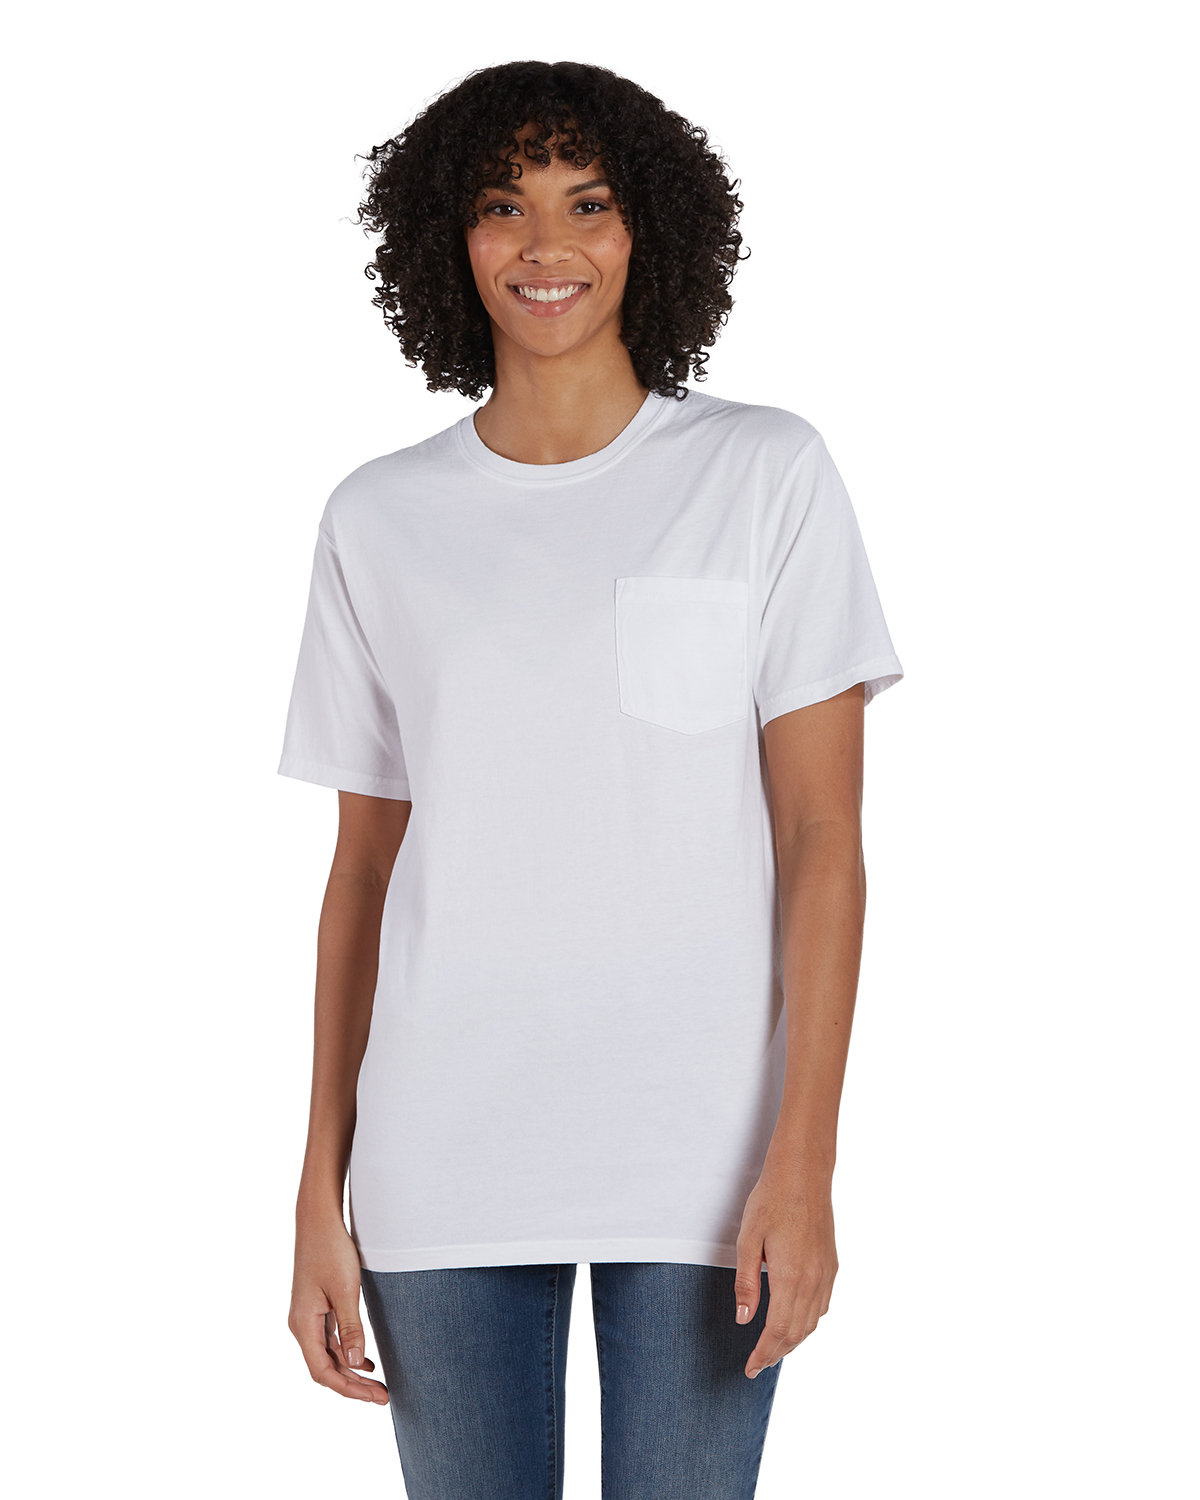 Unisex Garment-Dyed T-Shirt With Pocket-